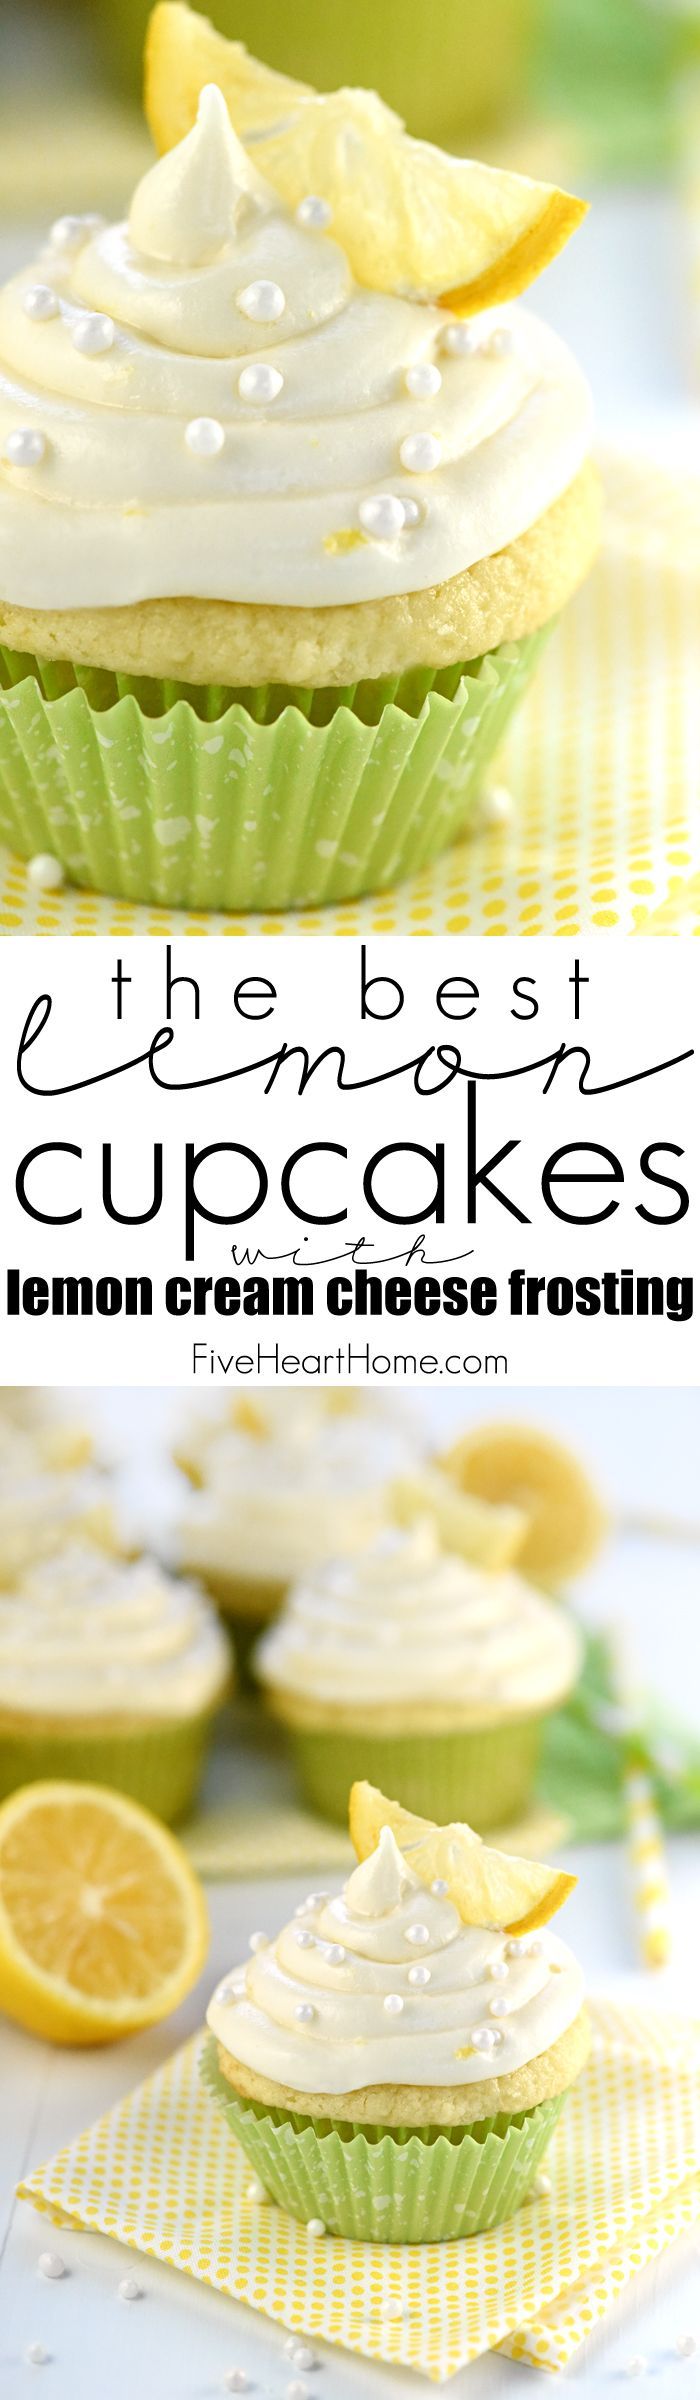 The BEST Lemon Cupcakes ~ start with a simple one-bowl batter and end with a soaking of lemon simple syrup and a topping of fluffy